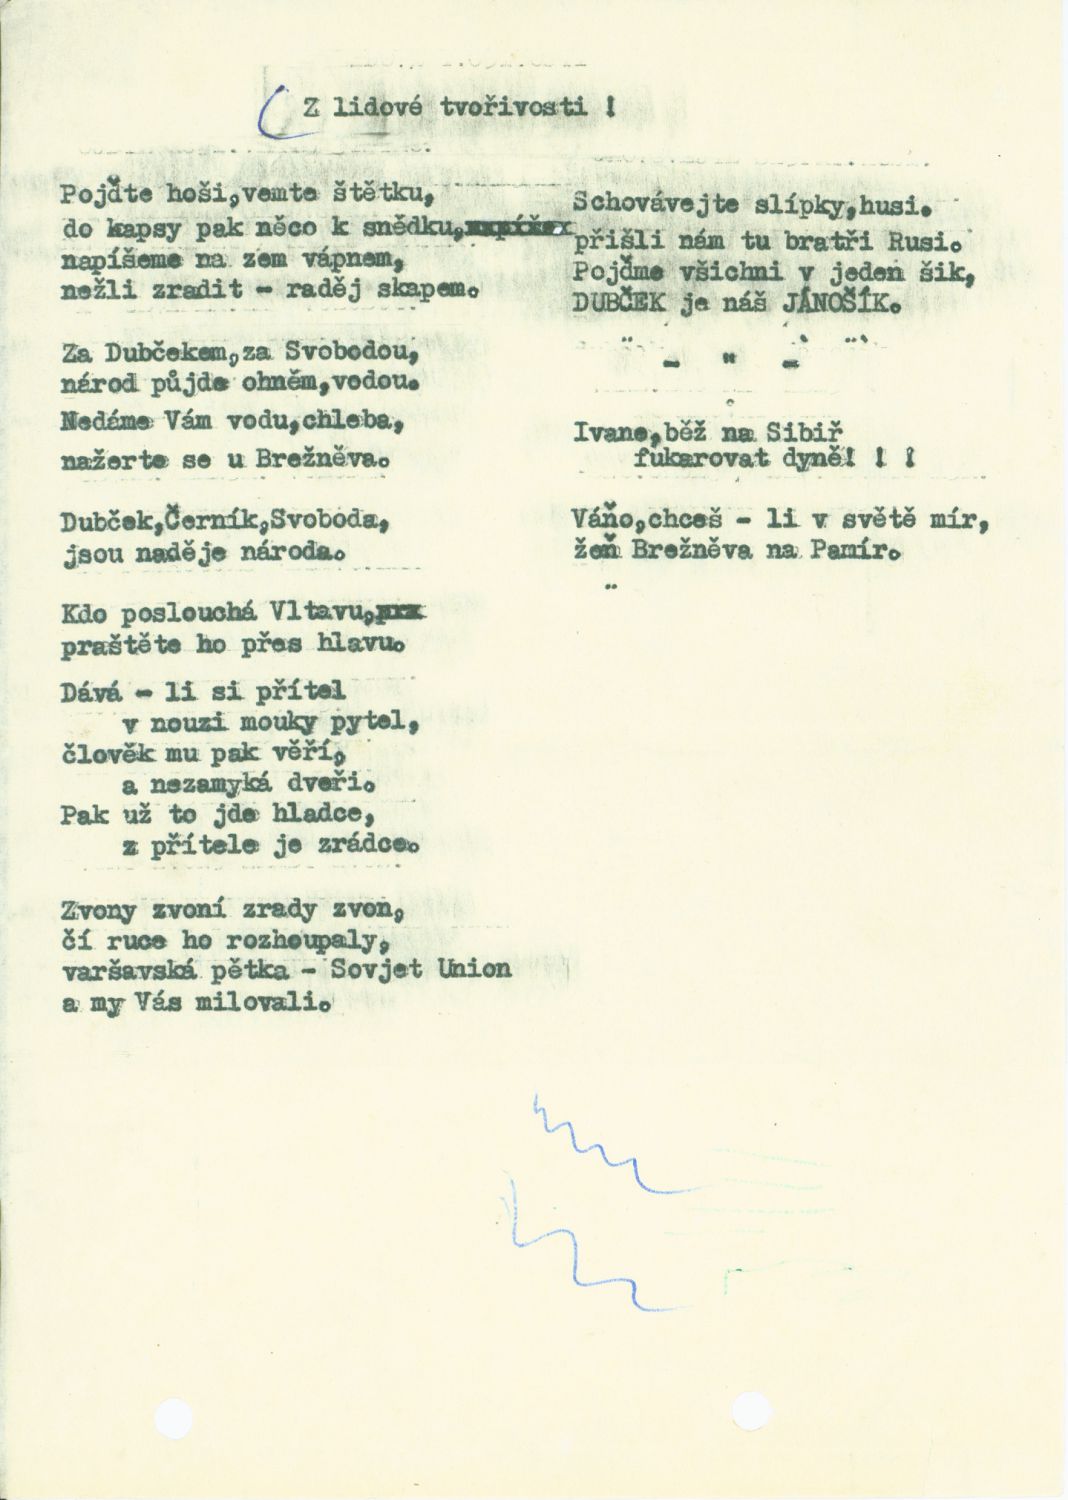 Poem Condemning the Occupation II